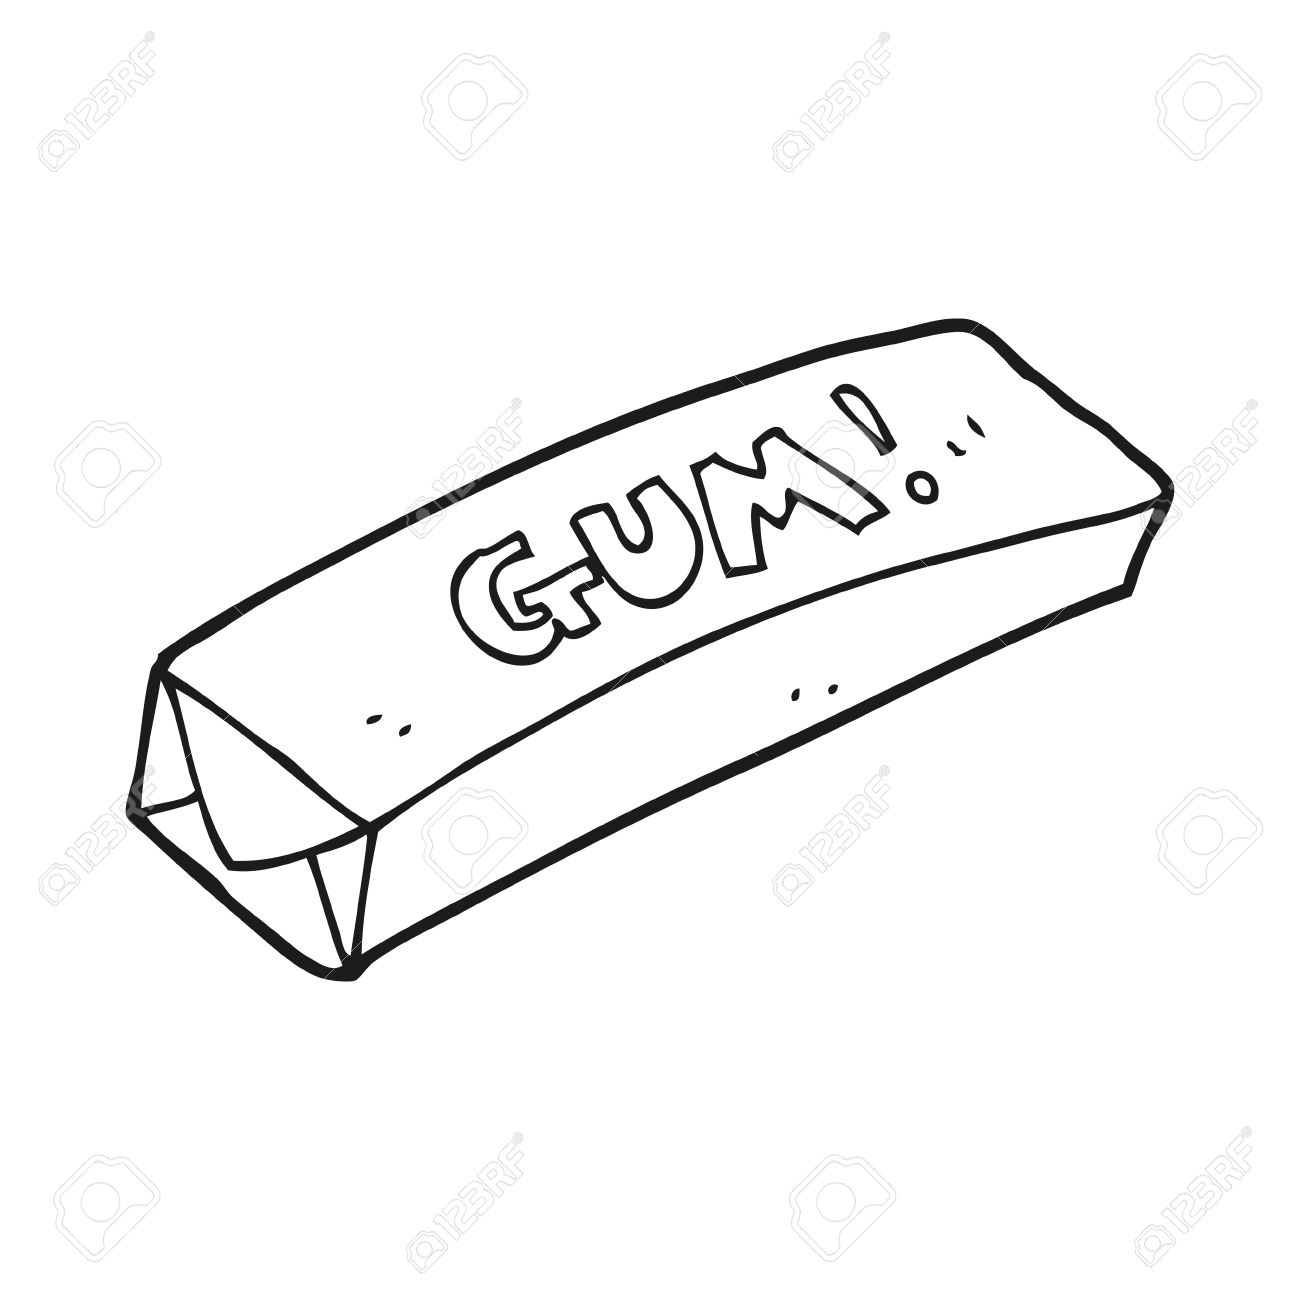 Gum clipart drawing, Gum drawing Transparent FREE for download on ...